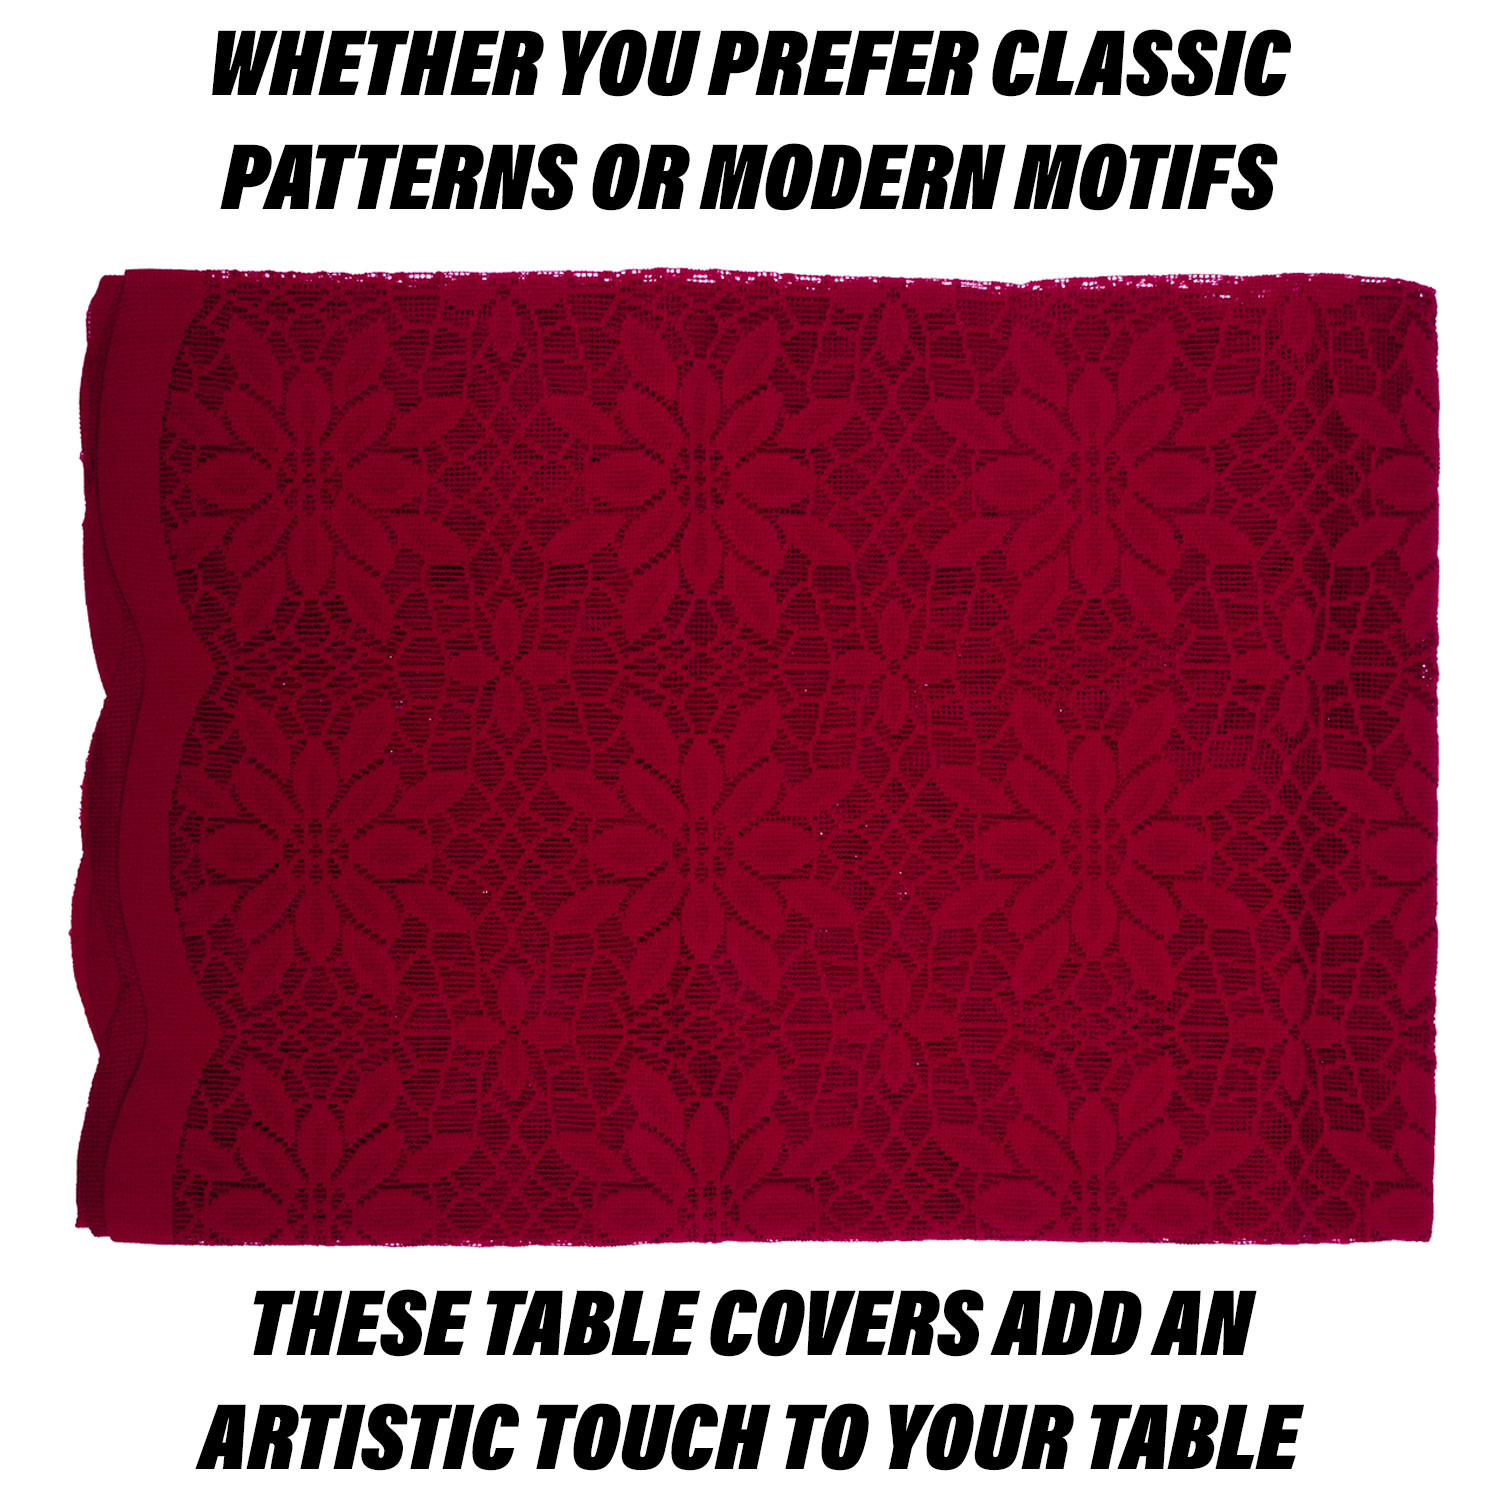 Kuber Industries Dining Table Cover | Cotton Table Cloth Cover | 6-Seater Table Cloth | Plain Jasmin Table Cover | Table Protector | Table Cover for Dining Table | 60x90 Inch | DTC | Maroon